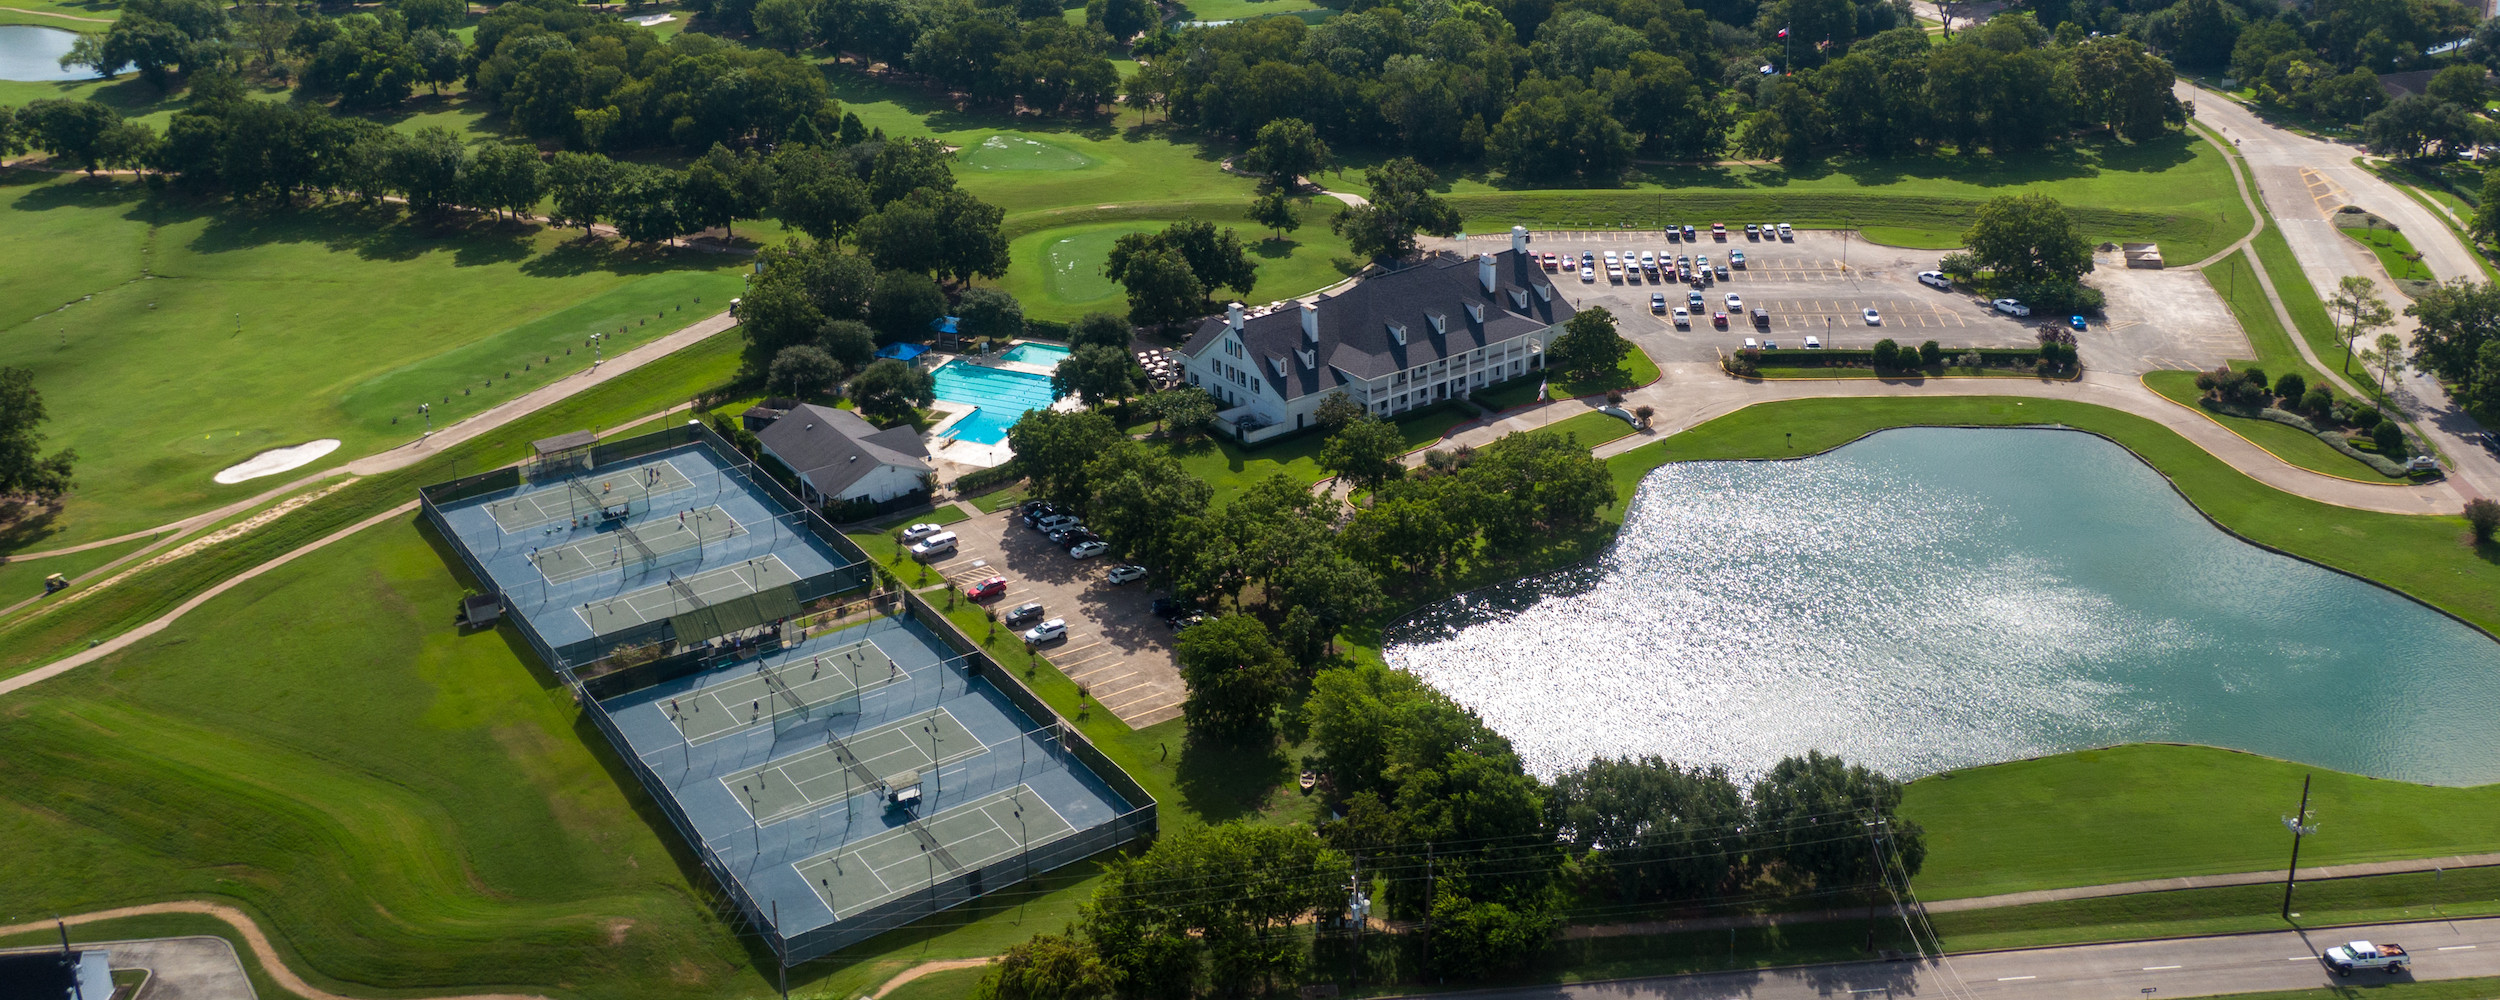 Aerial view of facility with tennis courts, pool, and golf courses in the background